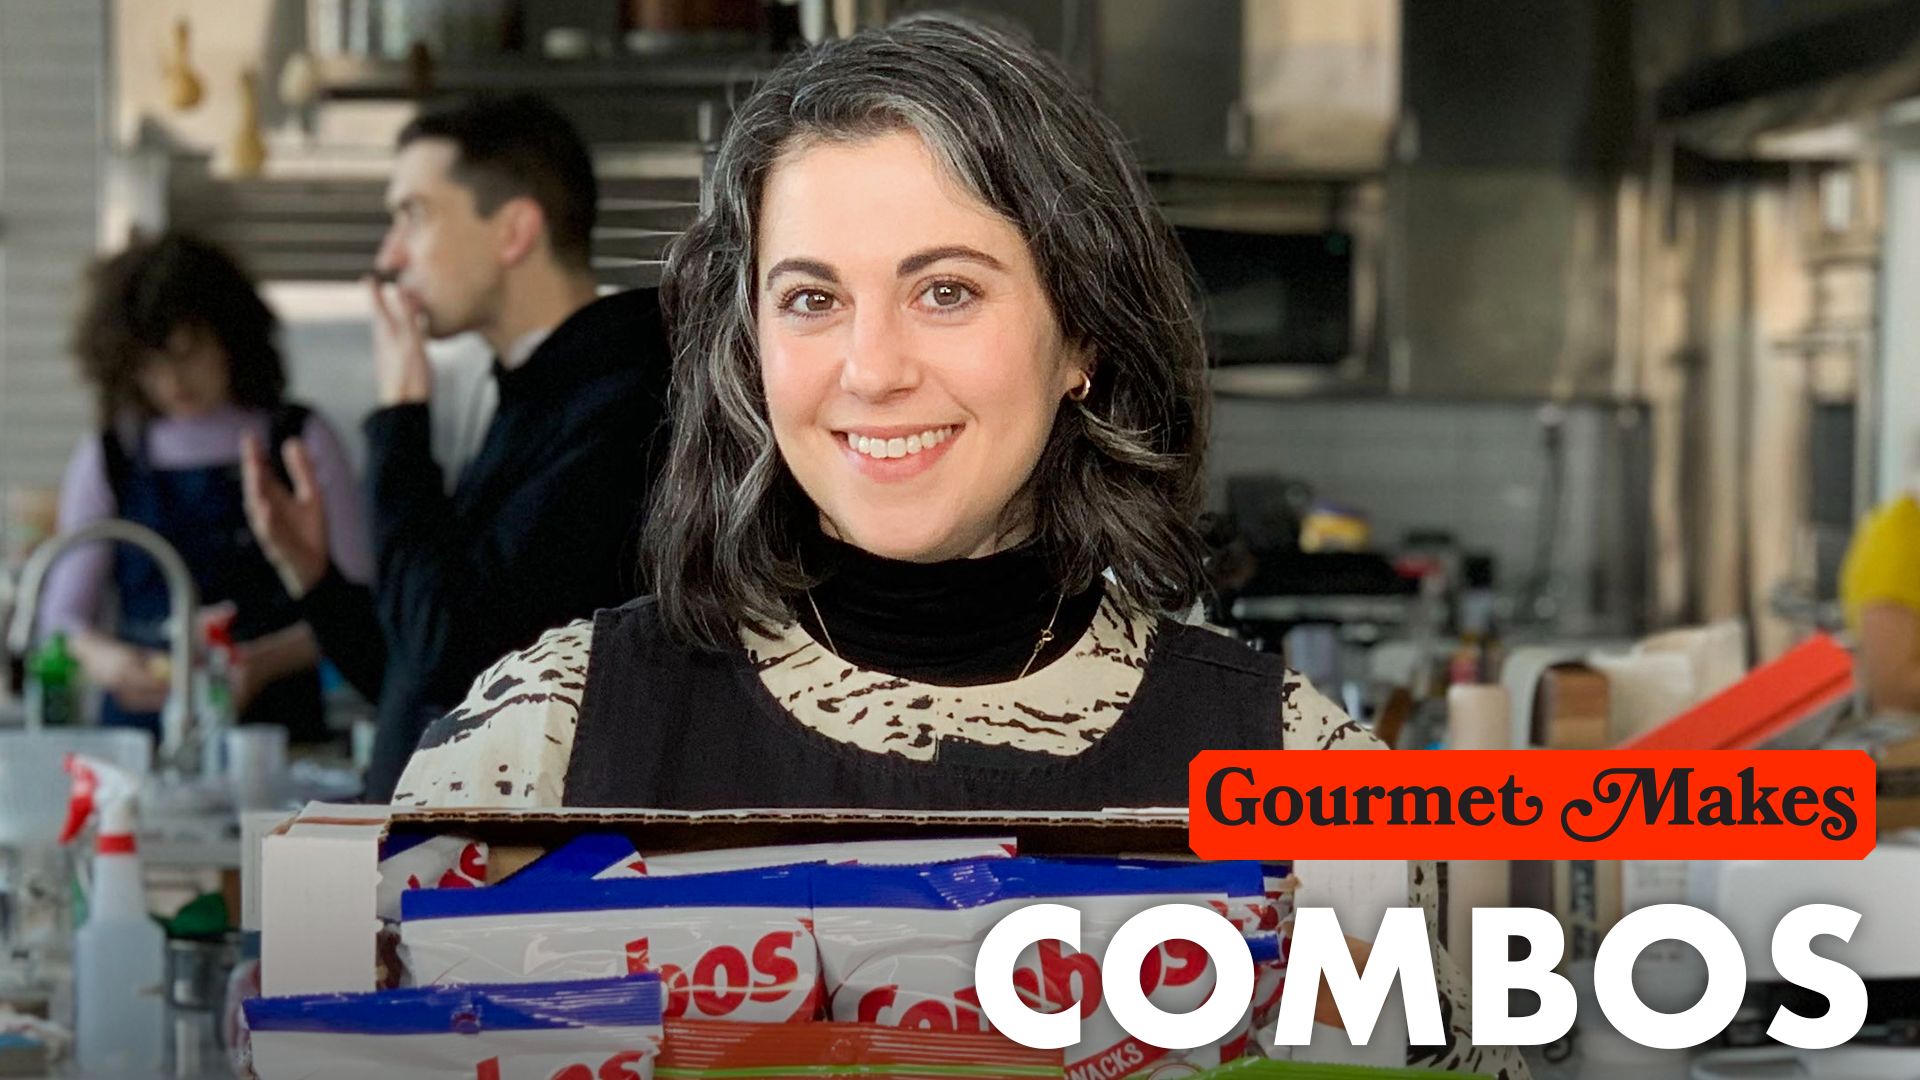 Watch Pastry Chef Attempts to Make Gourmet Combos, Gourmet Makes